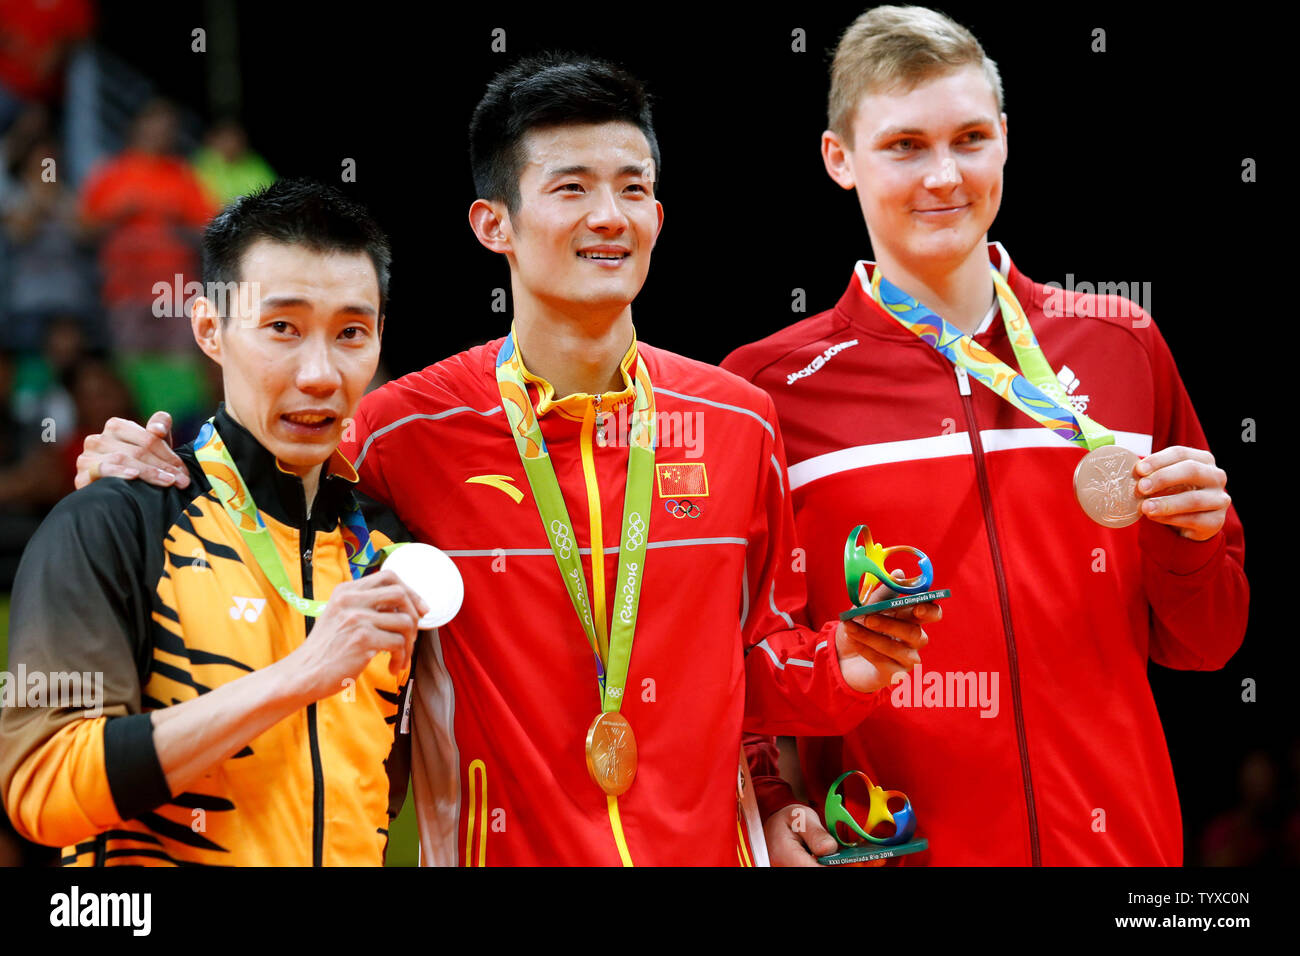 Medalists in Men's Badminton Singles (L-R) Malaysia's Chong Wei Lee with silver, China's Long Chen with gold and Denmark's Viktor Axelsen with bronze, pose for a photo with their medals at the 2016 Rio Summer Olympics in Rio de Janeiro, Brazil, on August 20, 2016.   Photo by Matthew Healey/UPI Stock Photo